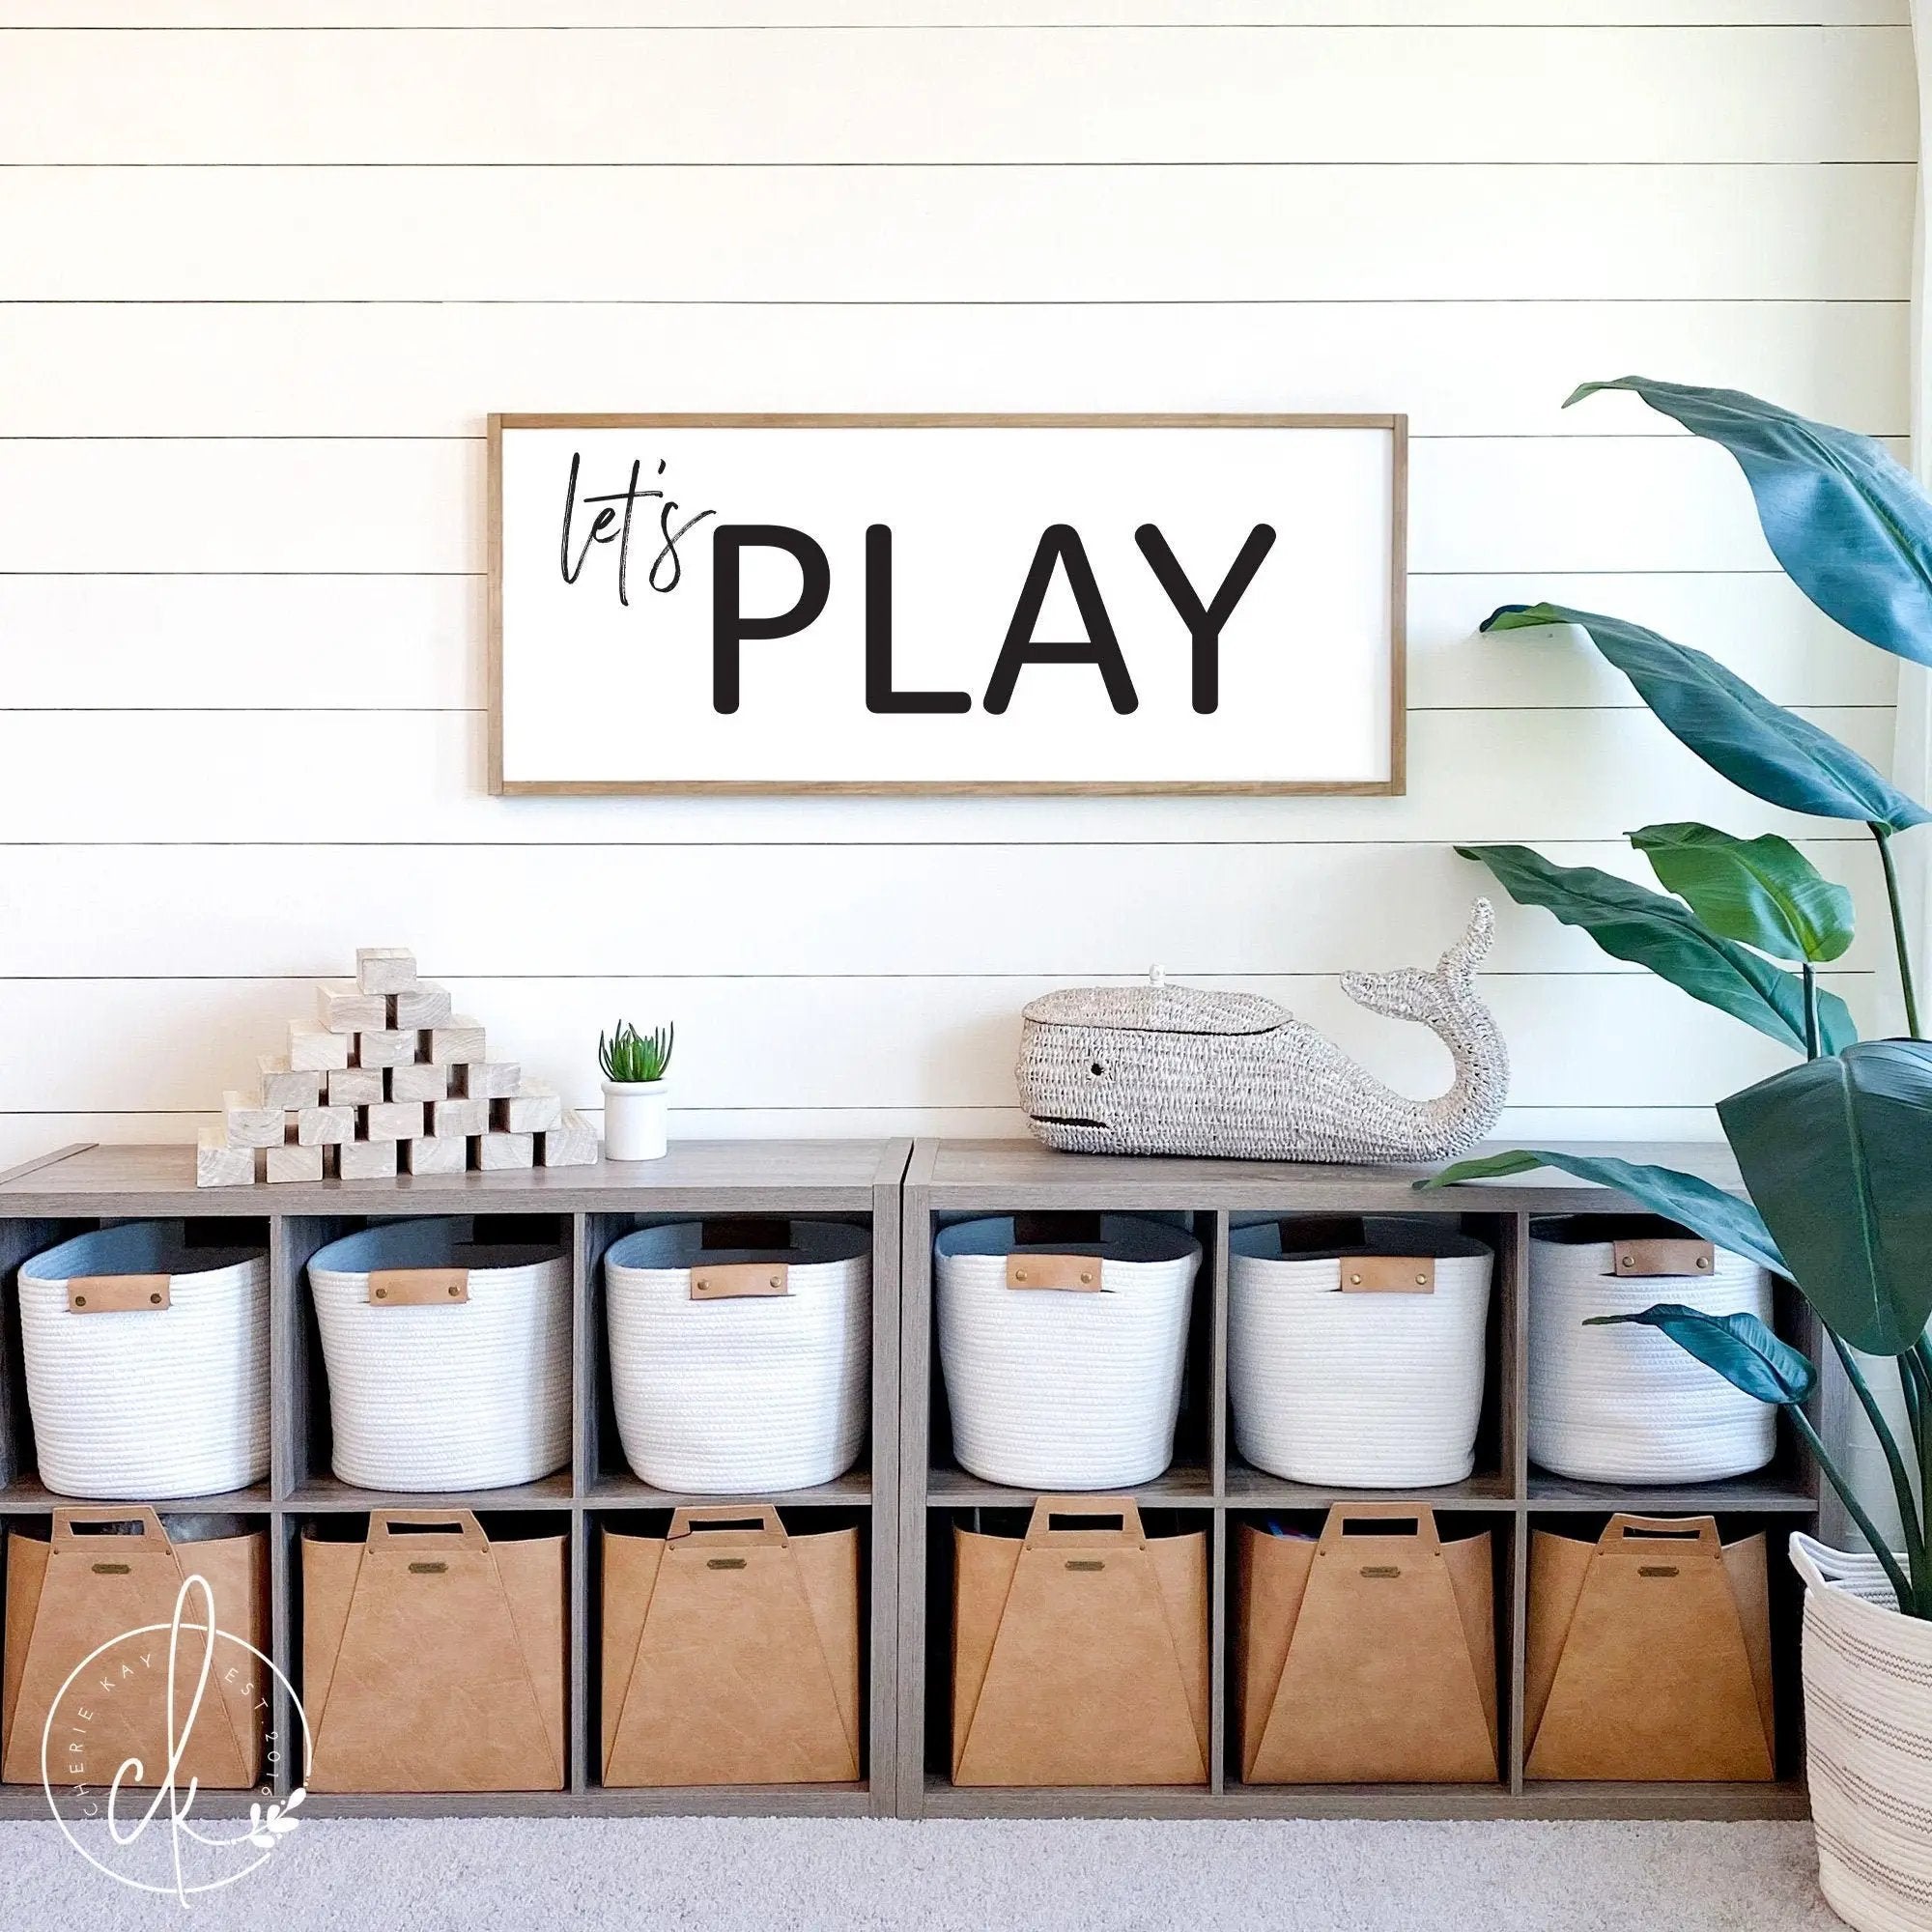 Let's play sign | playroom sign | kids room decor | kids playroom sign | playroom wall decor | play room decor